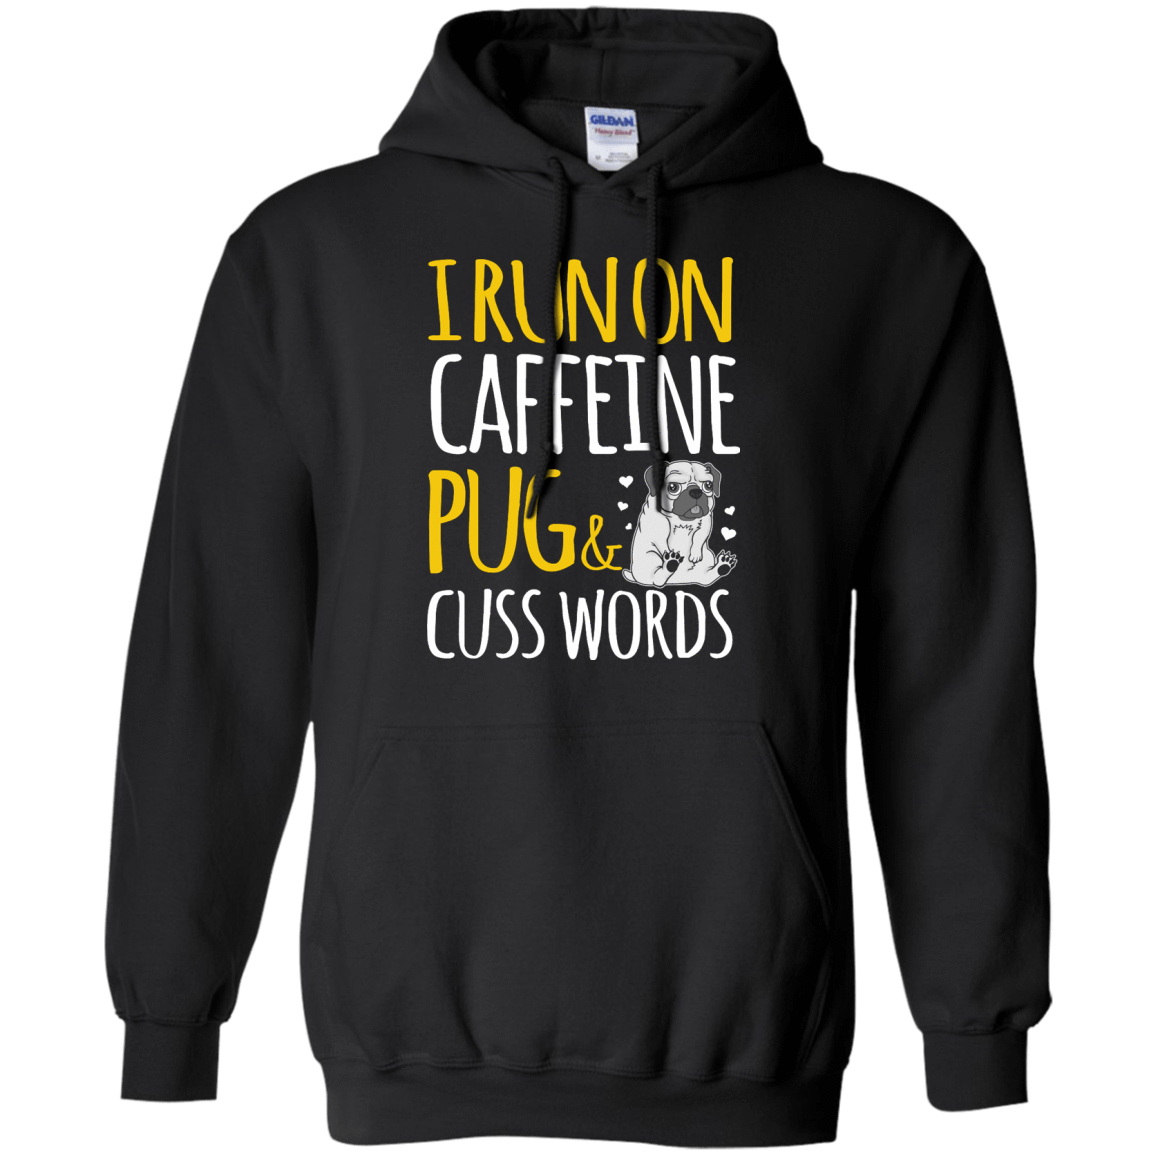 Check Out This Awesome Shirt I Run On Caffeine Pug & Cuss Words Tees/h